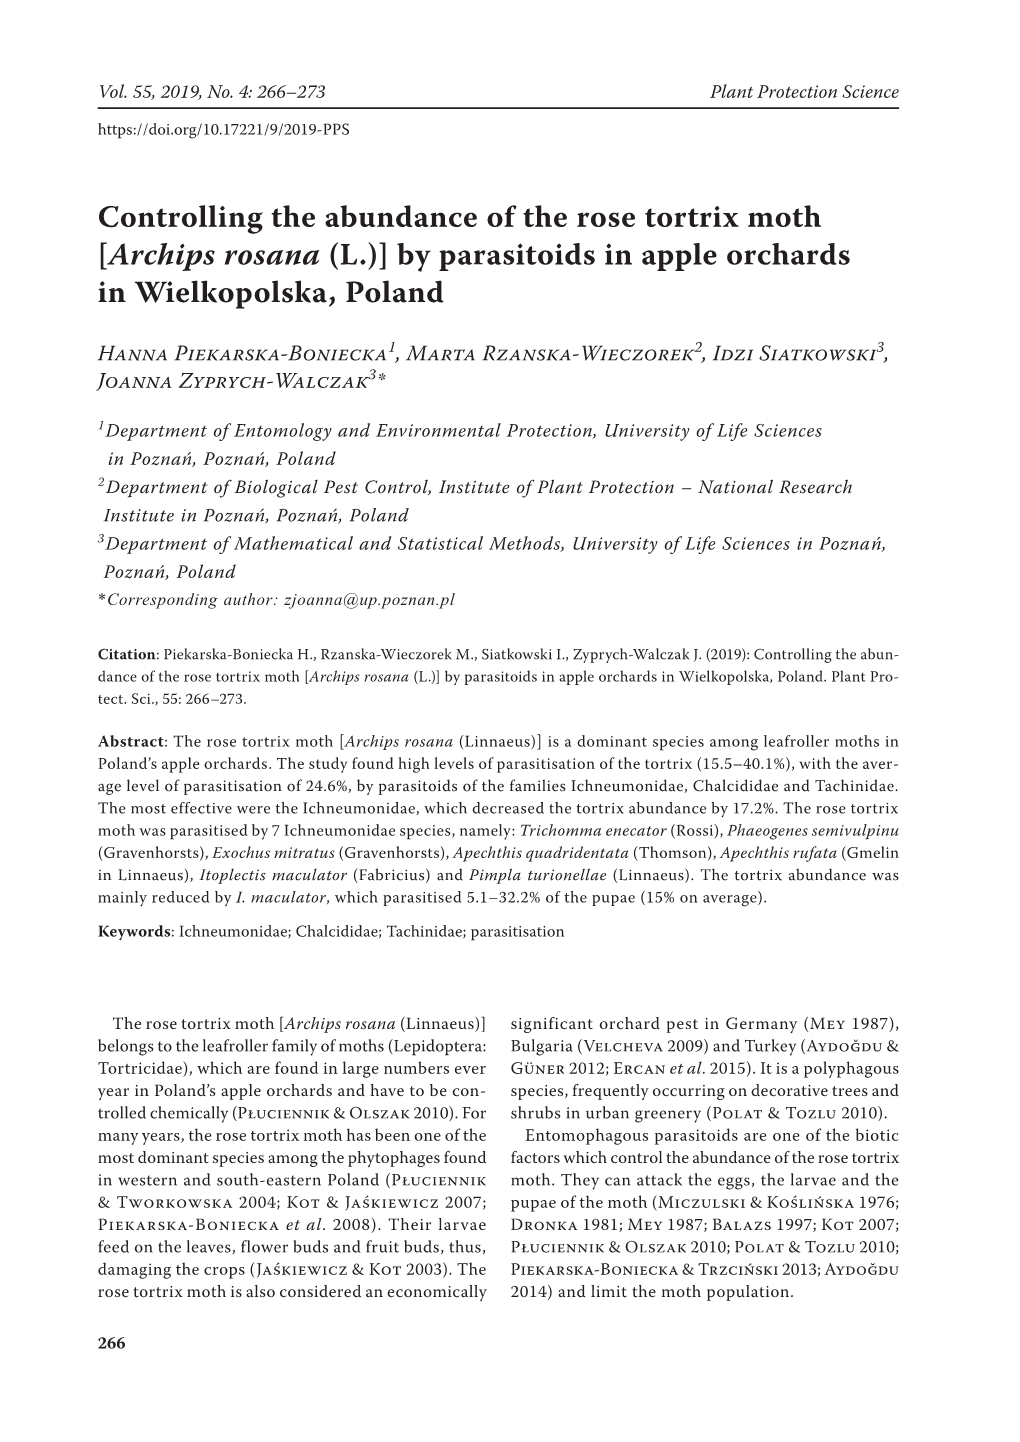 Controlling the Abundance of the Rose Tortrix Moth [Archips Rosana (L.)] by Parasitoids in Apple Orchards in Wielkopolska, Poland